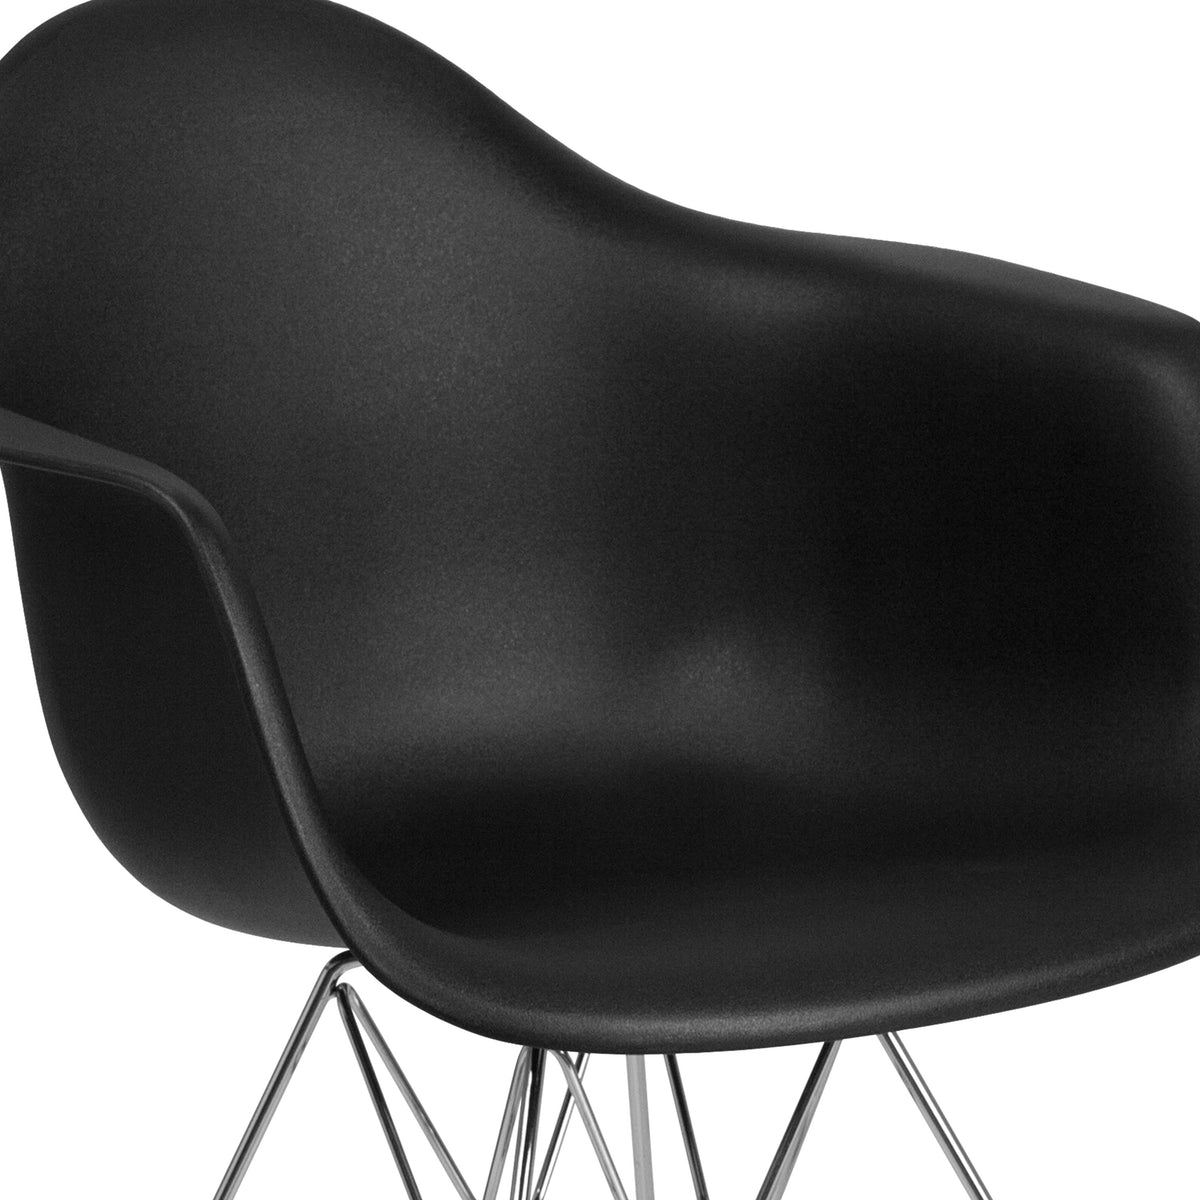 Black |#| Black Plastic Chair with Arms and Chrome Base - Accent & Side Chair